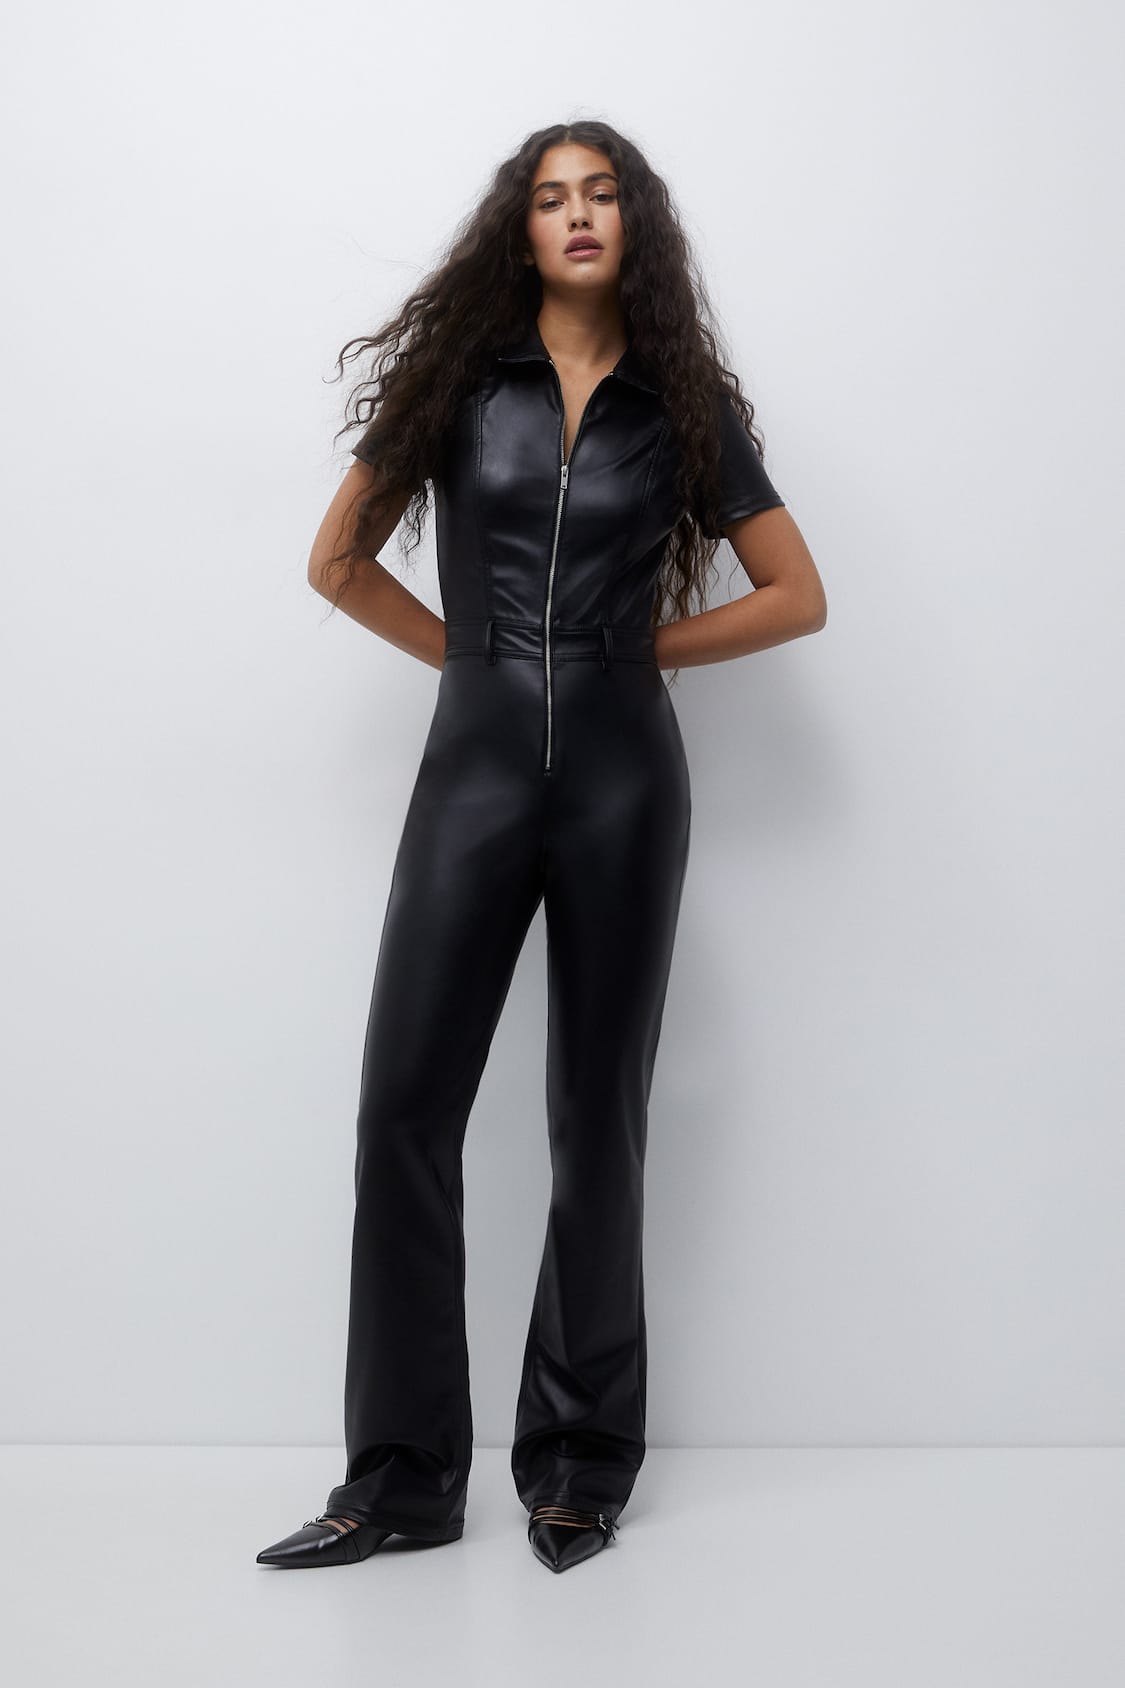 Dungaree USA Jumpsuits & Playsuits for Women for sale